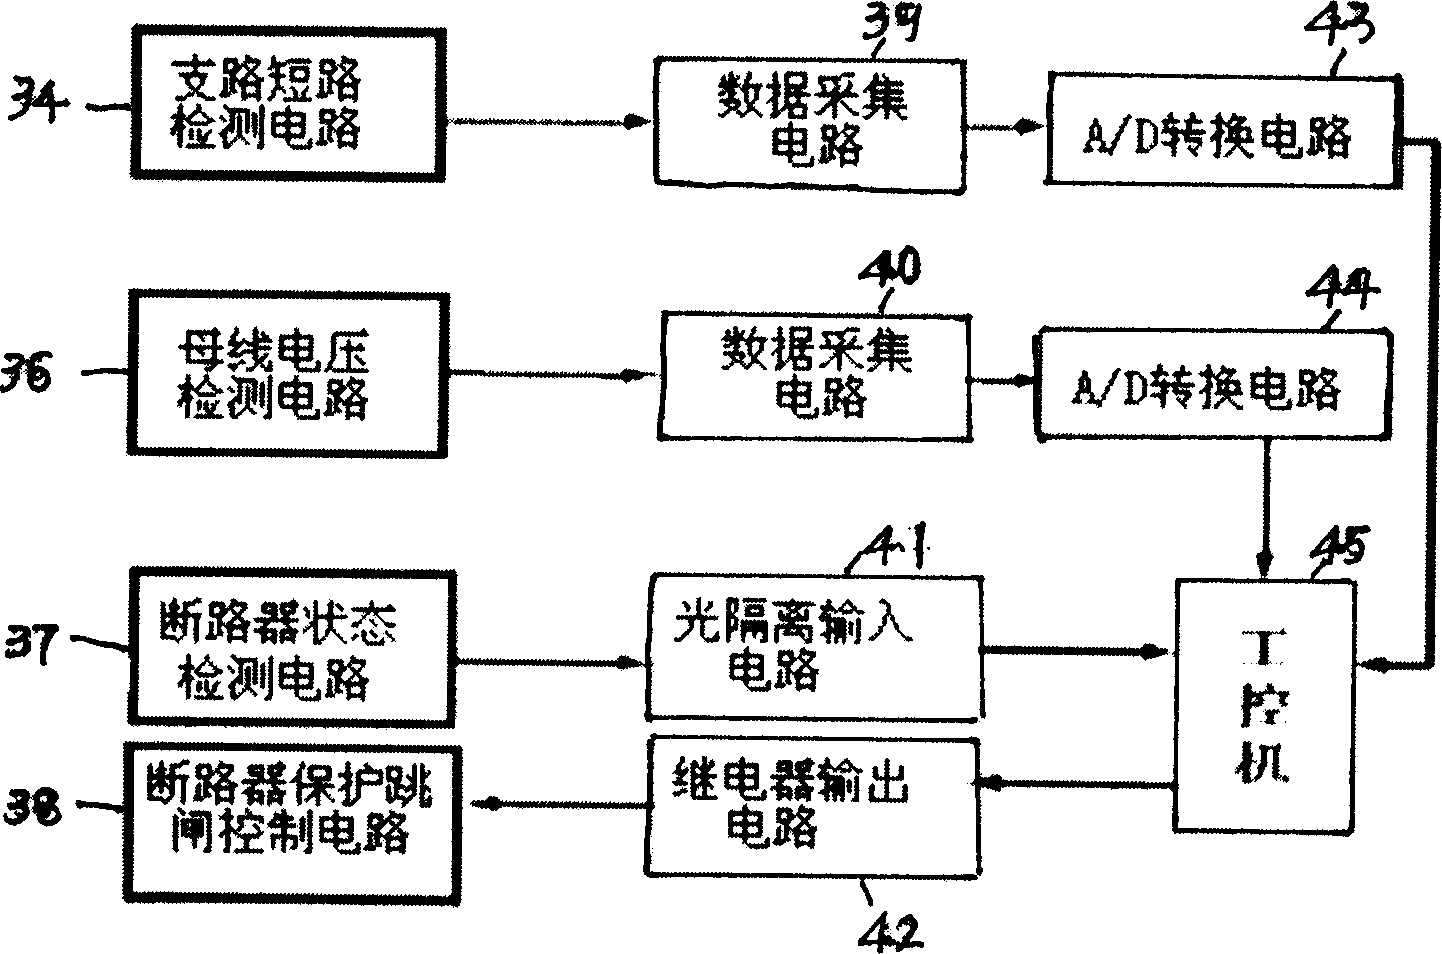 DC system short circuit protection device